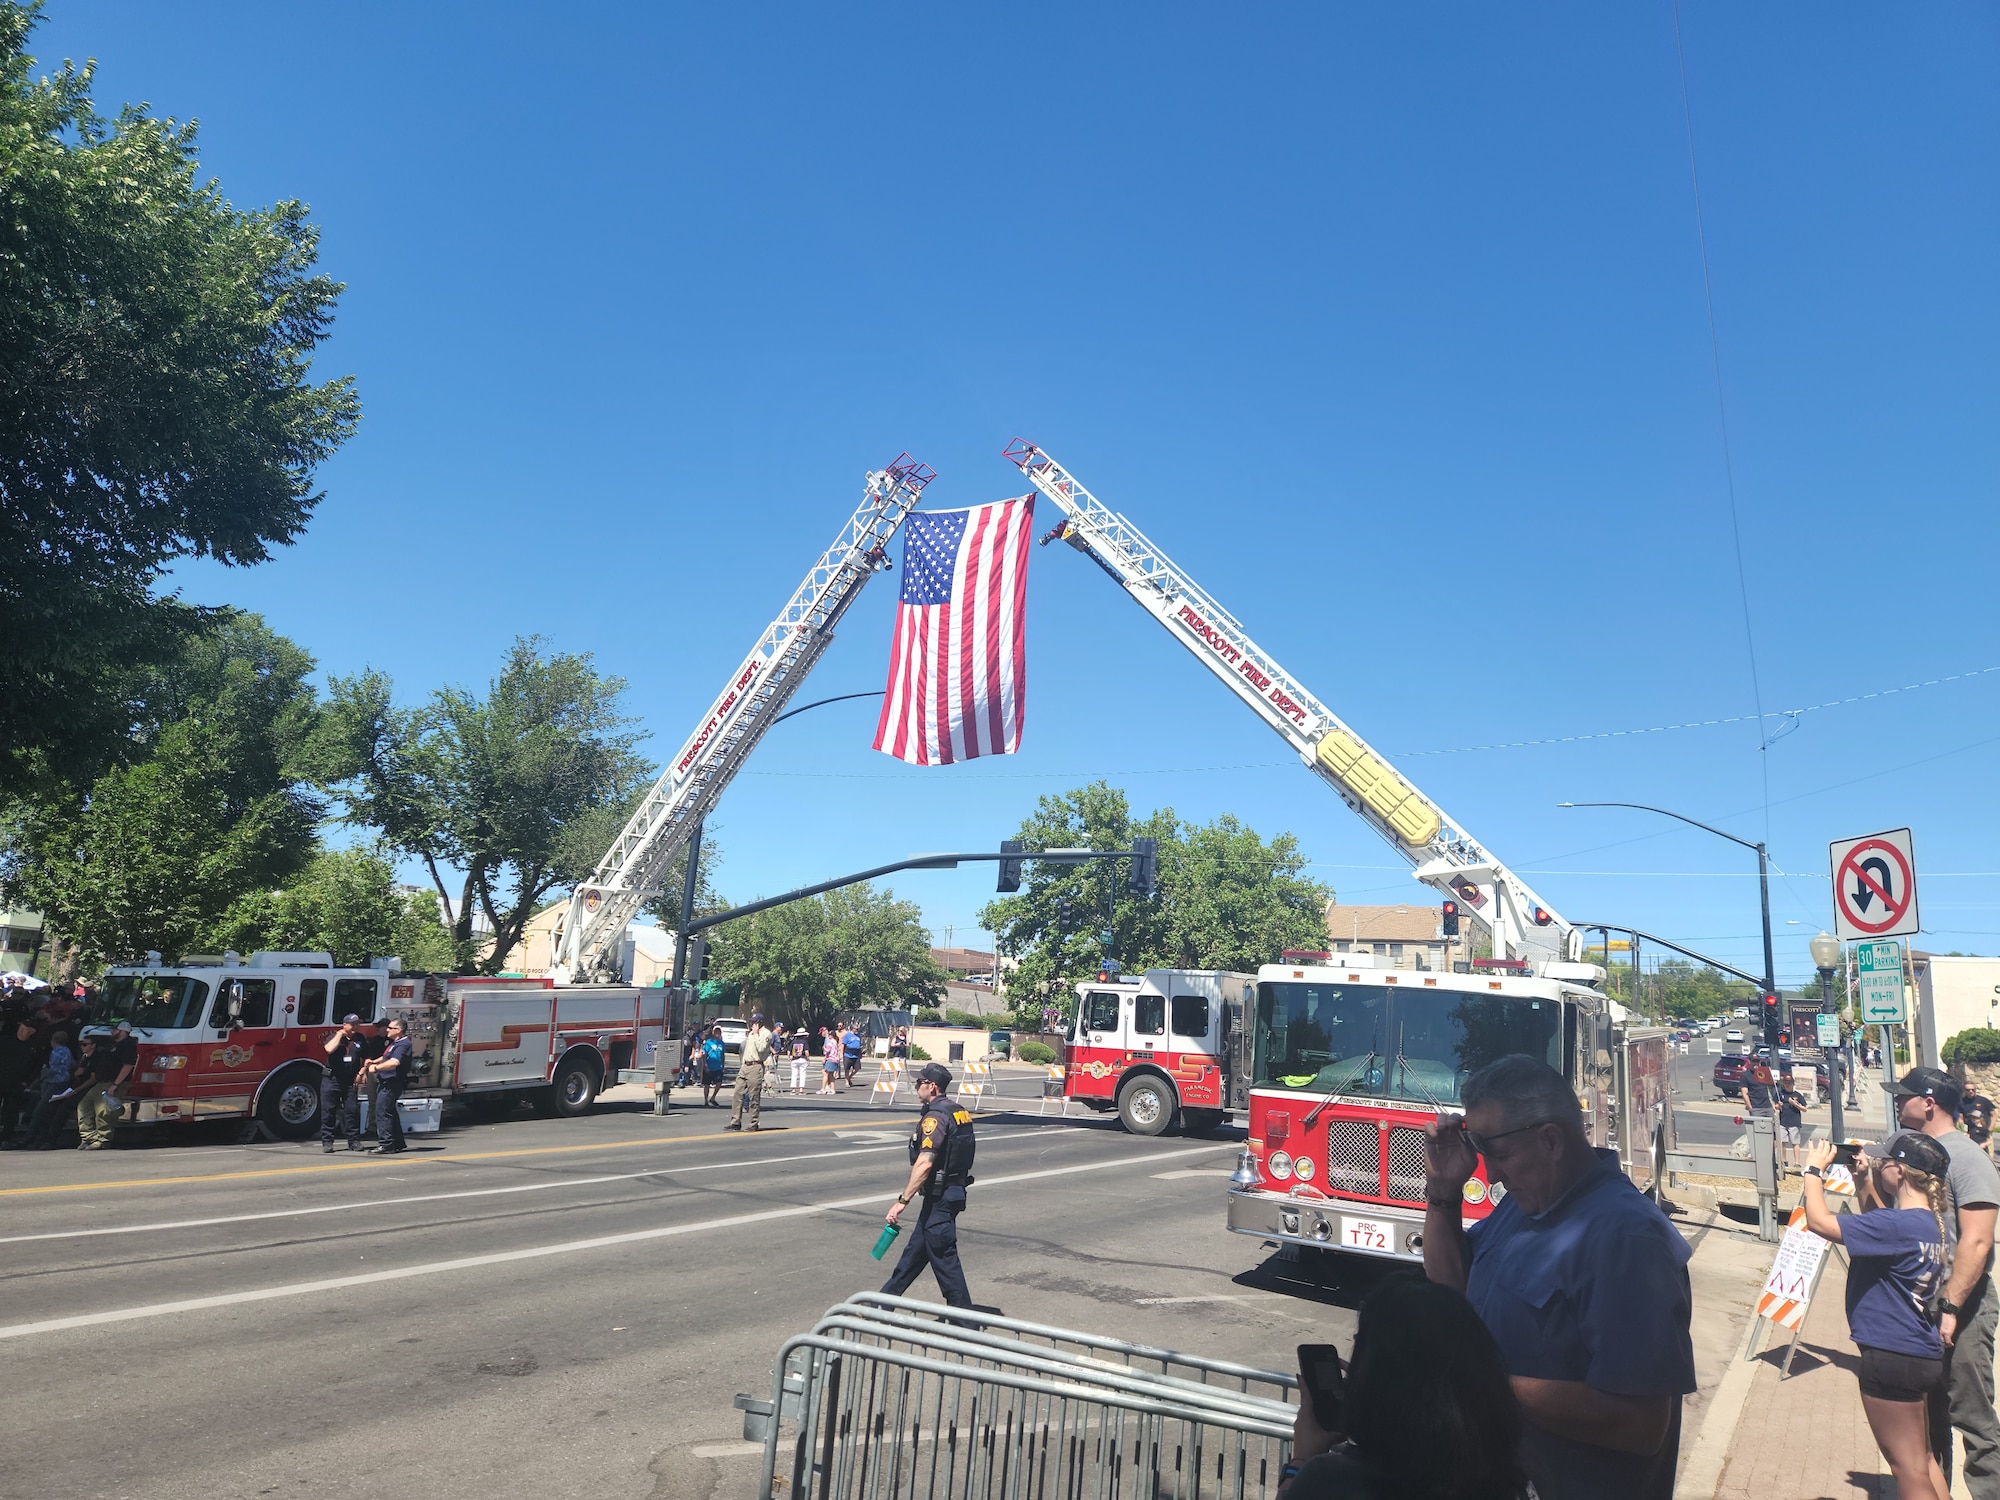 Government agencies setup for the 10 year memorial events for the Granite Mountain Hotshots at Prescott, Arizona, June 30, 2023.